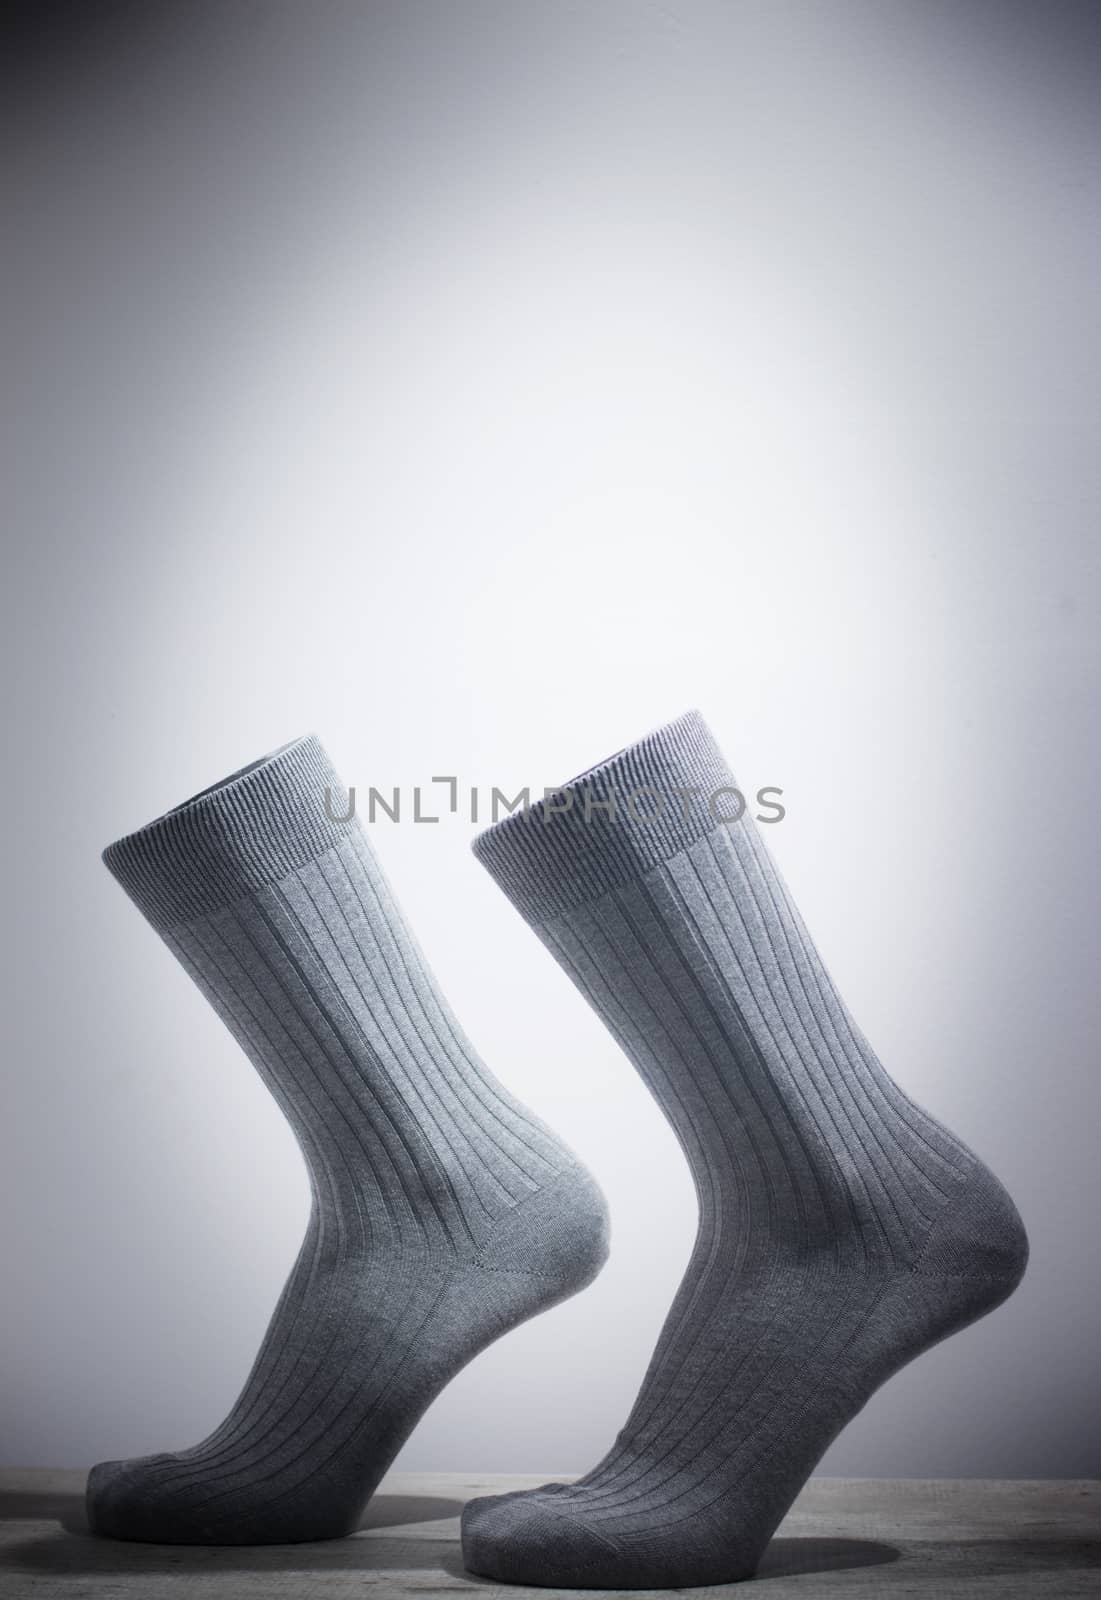 Surrealist socks and feet walking without legs  by edwardolive